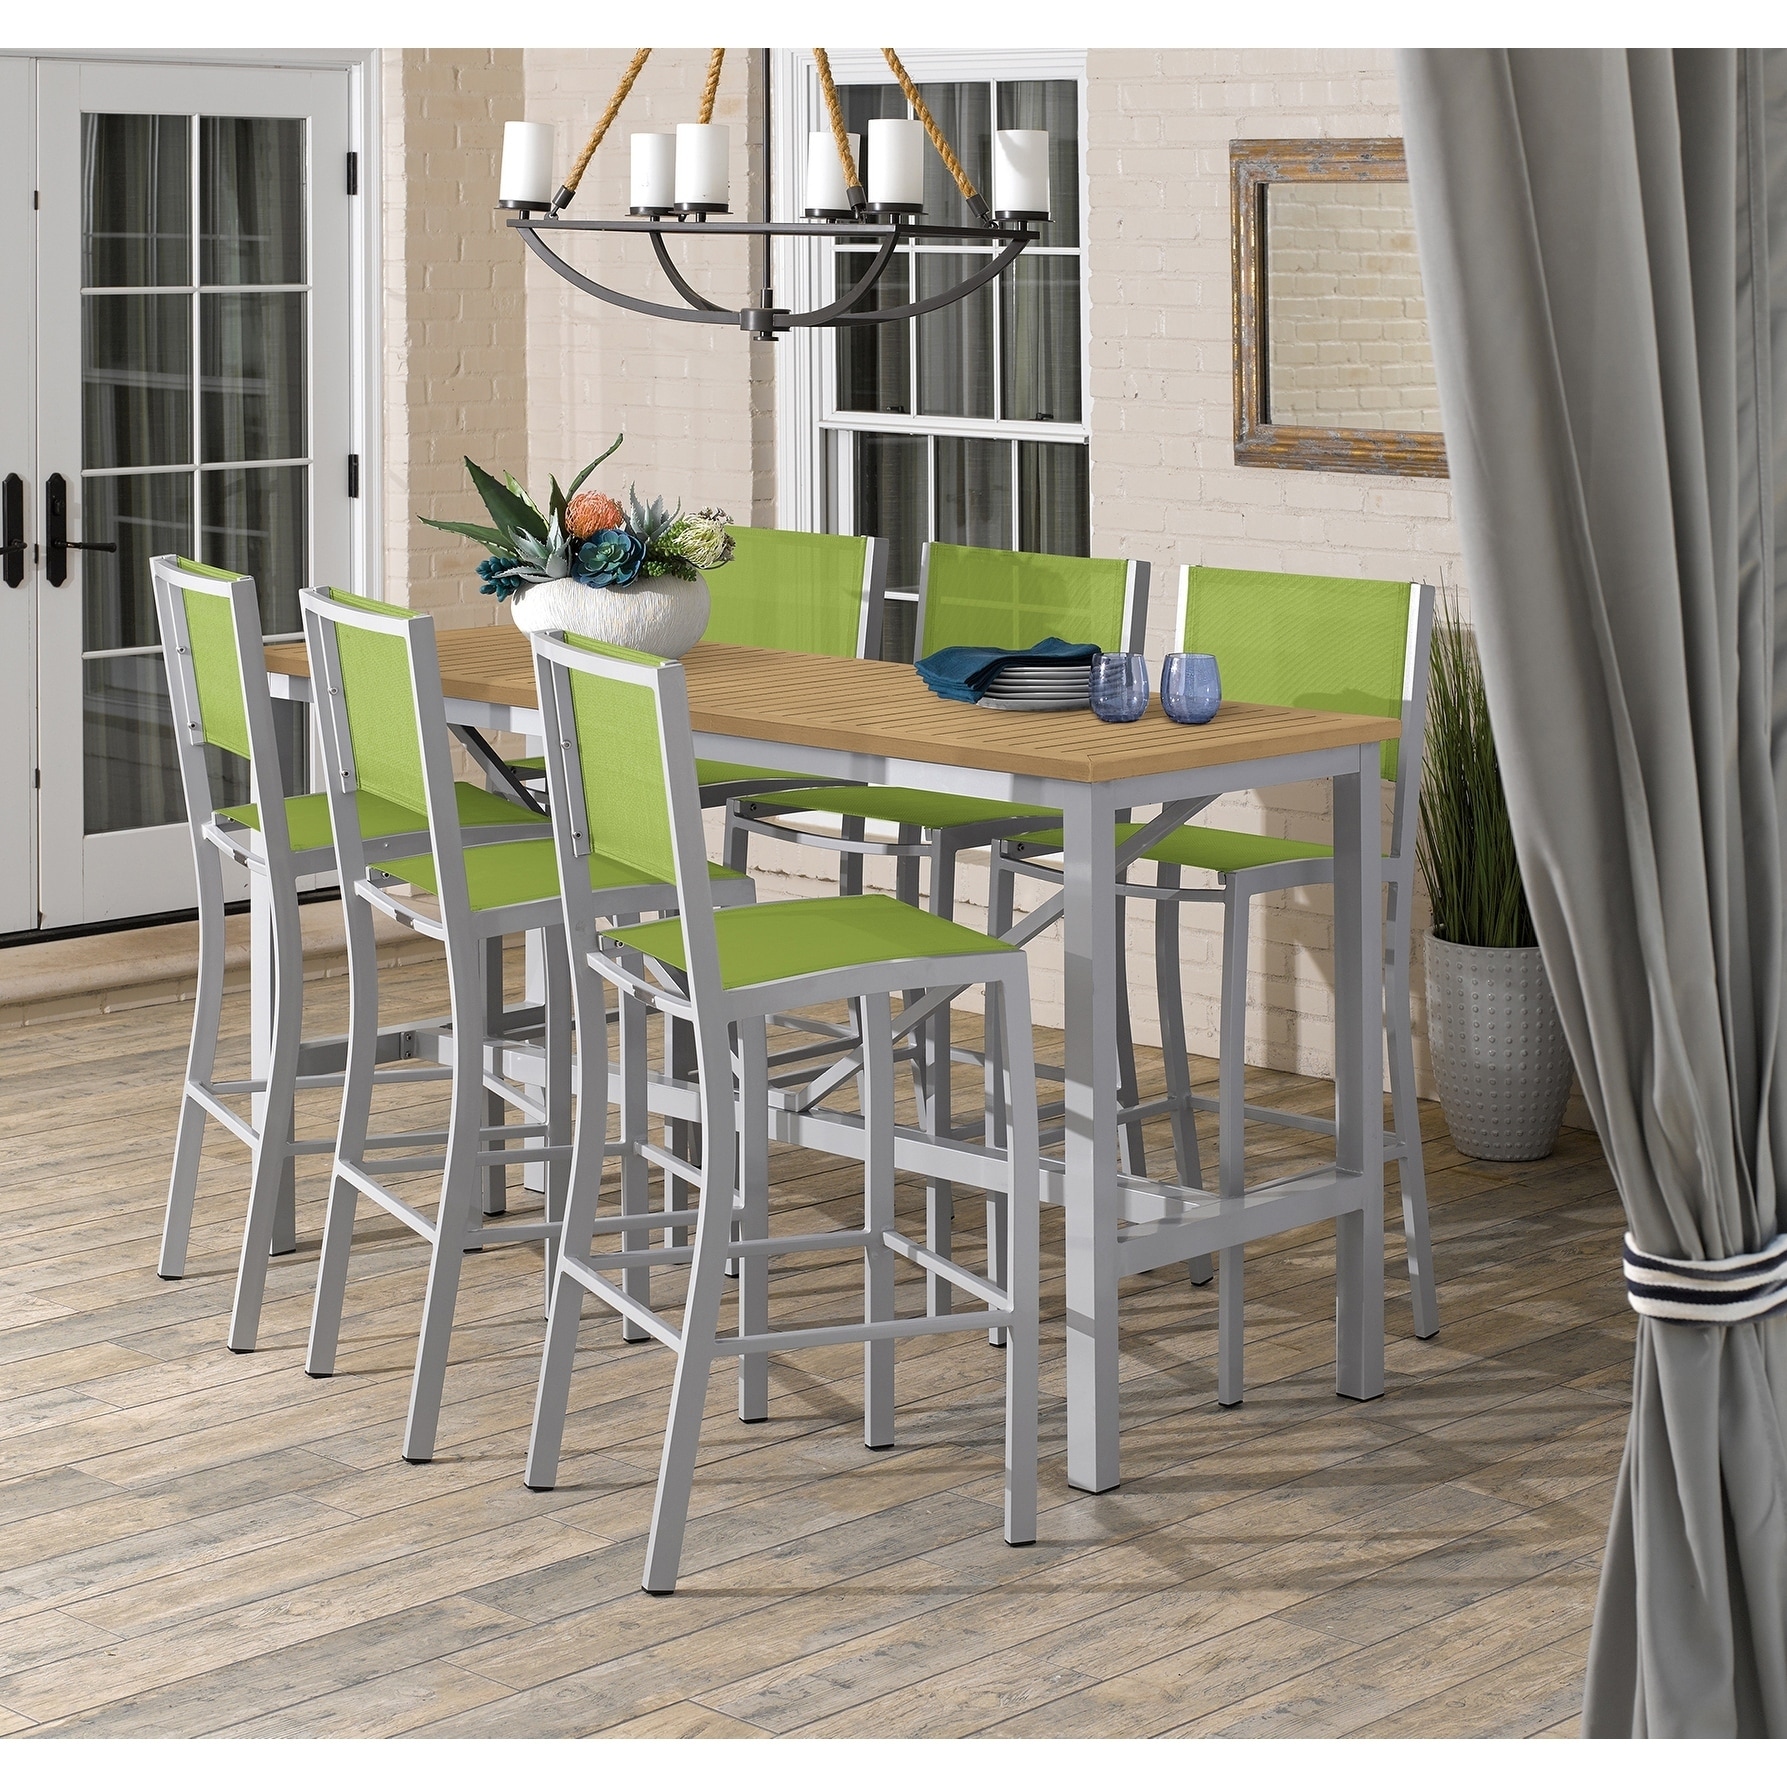 Oxford Garden Travira 7-piece 72-in X 30-in Tekwood Natural Bar Table and Sling Bar Chair Set - Go Green Sling